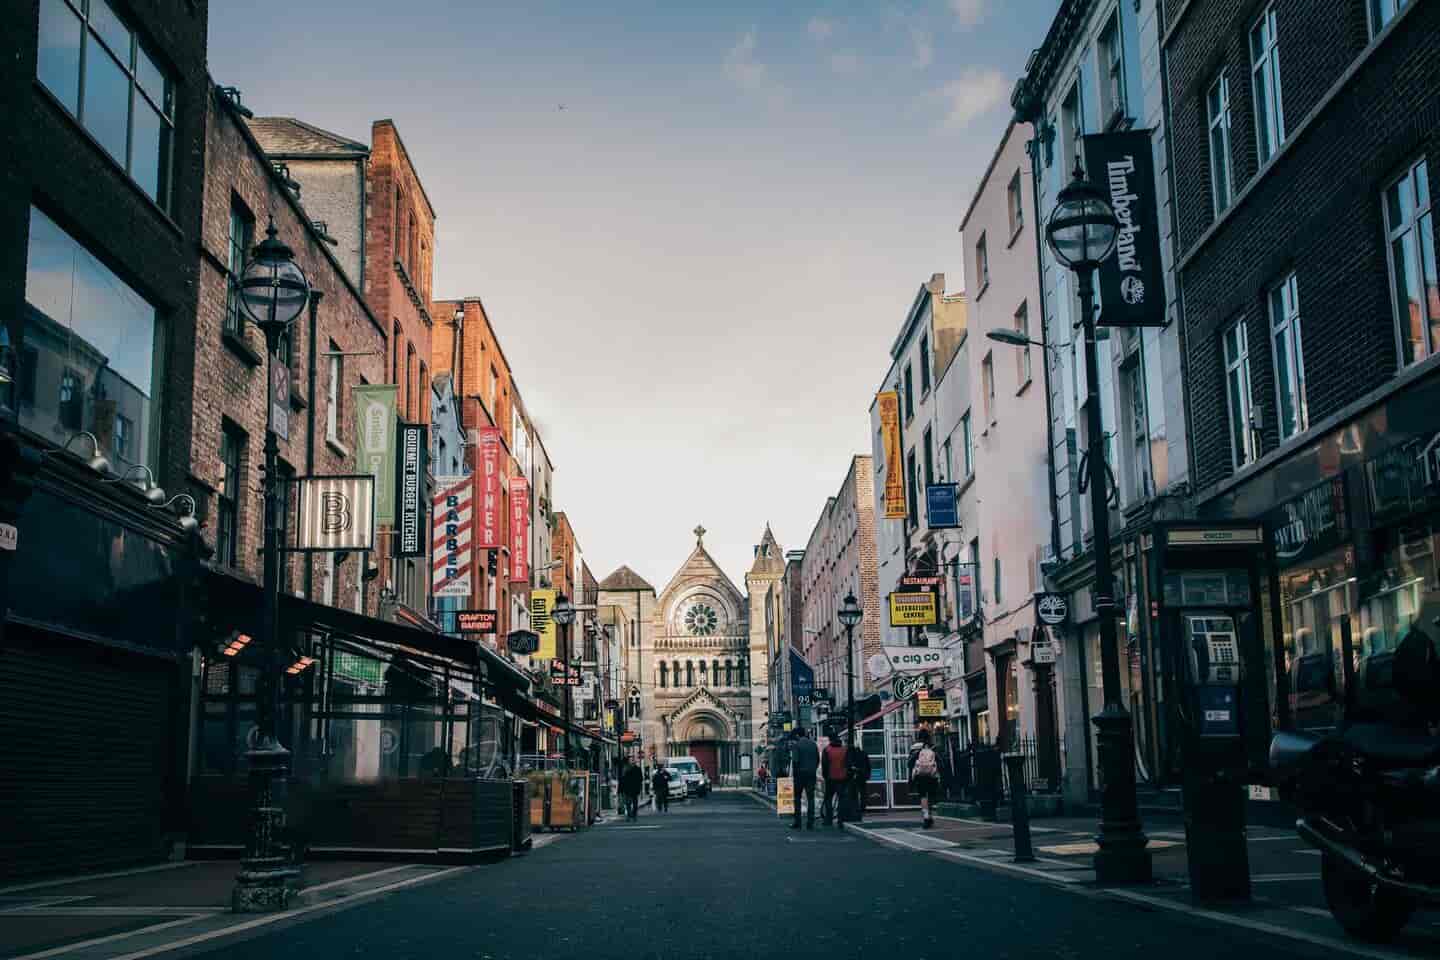 Student Accommodation in Dublin - The shops of Grafton Street